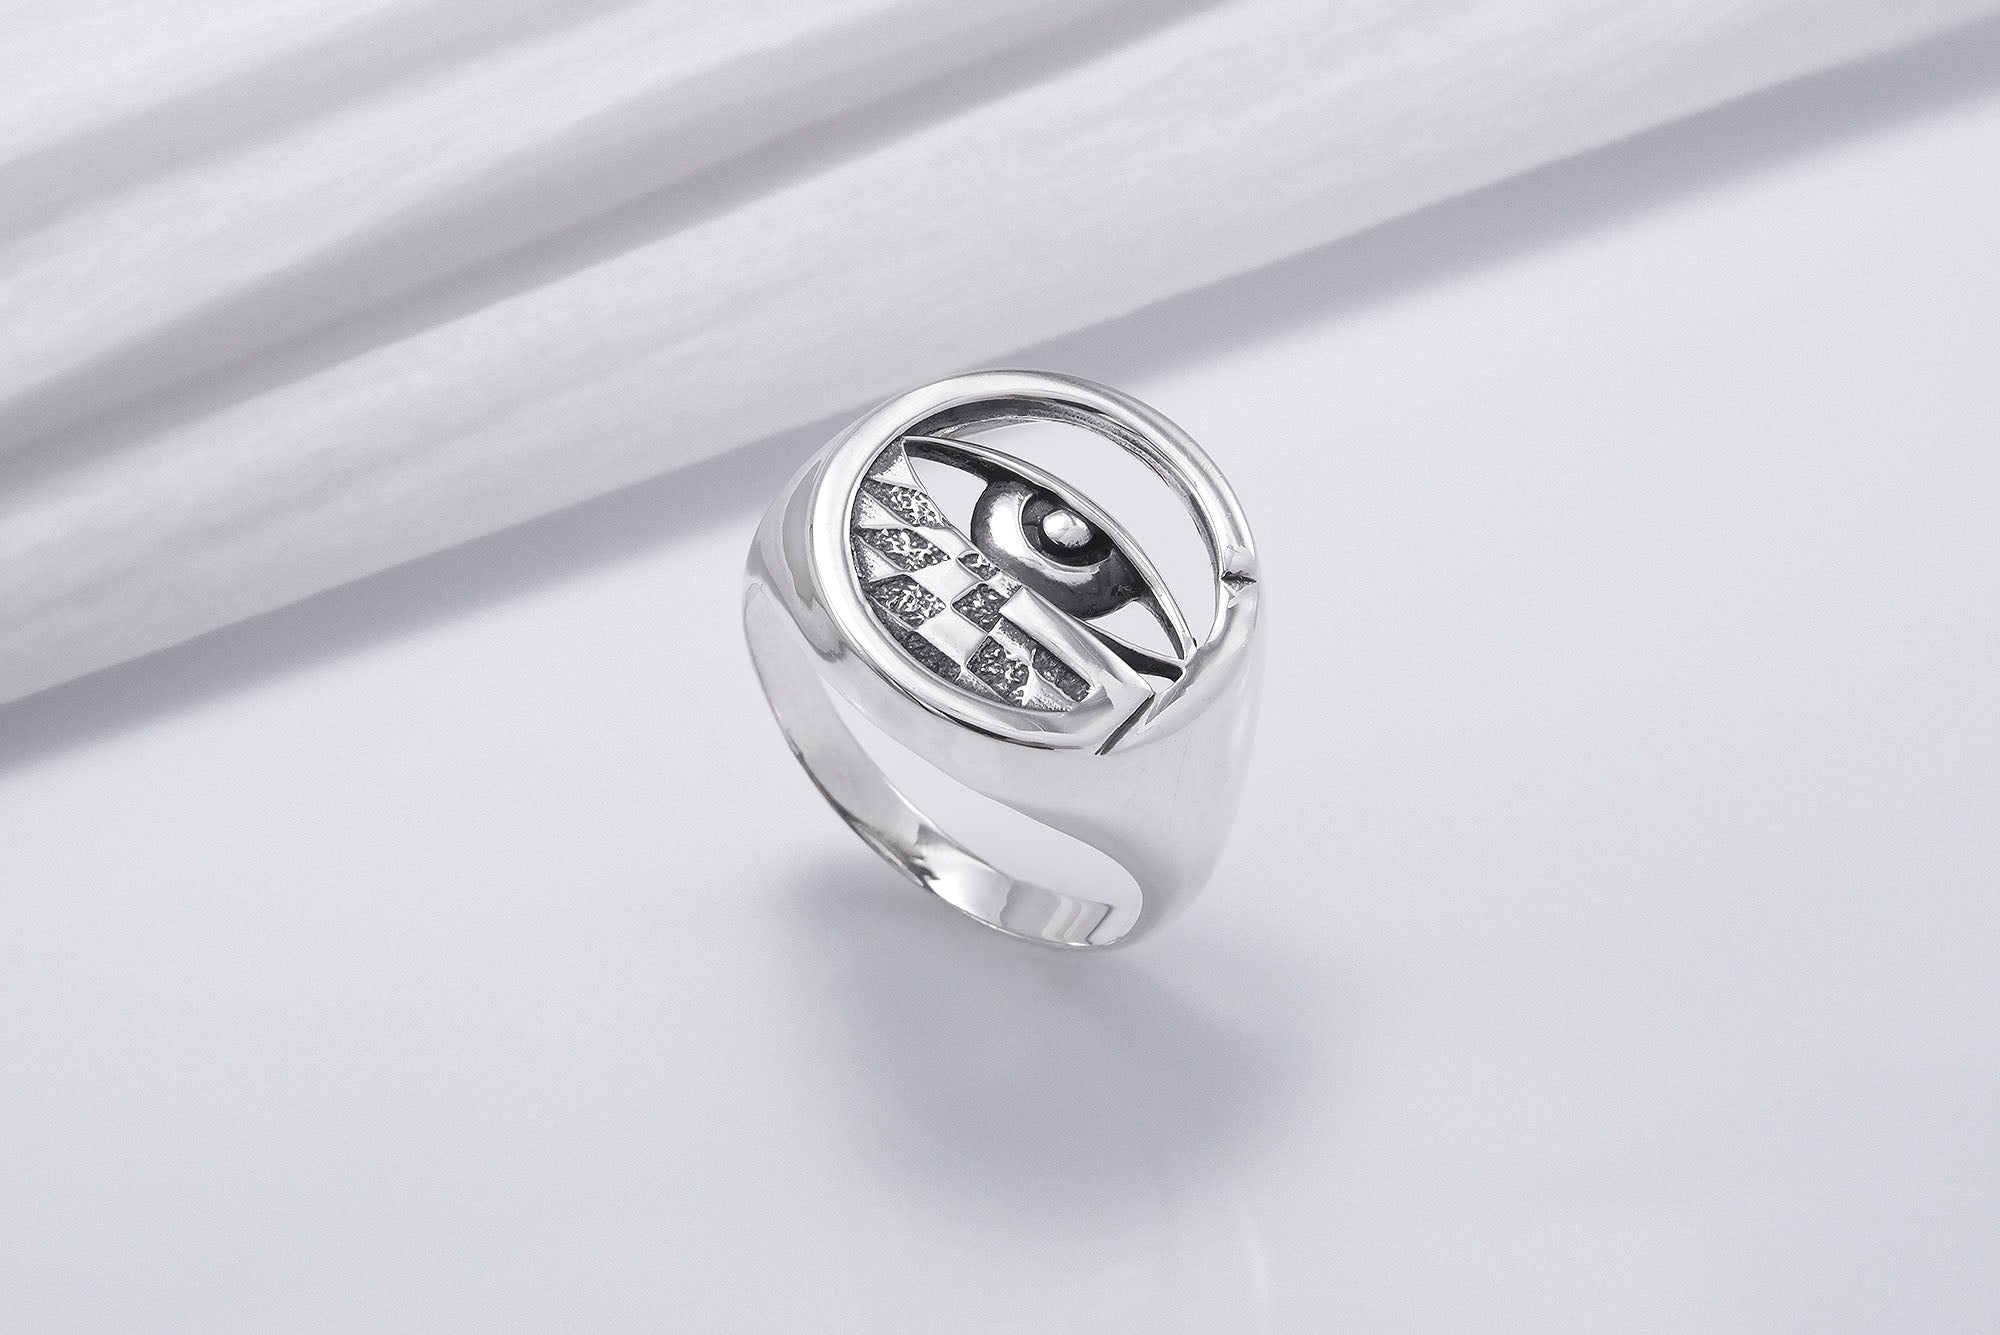 Sterling Silver All Seeing Eye Signet Ring with Chess Board, Handmade Mason Jewelry